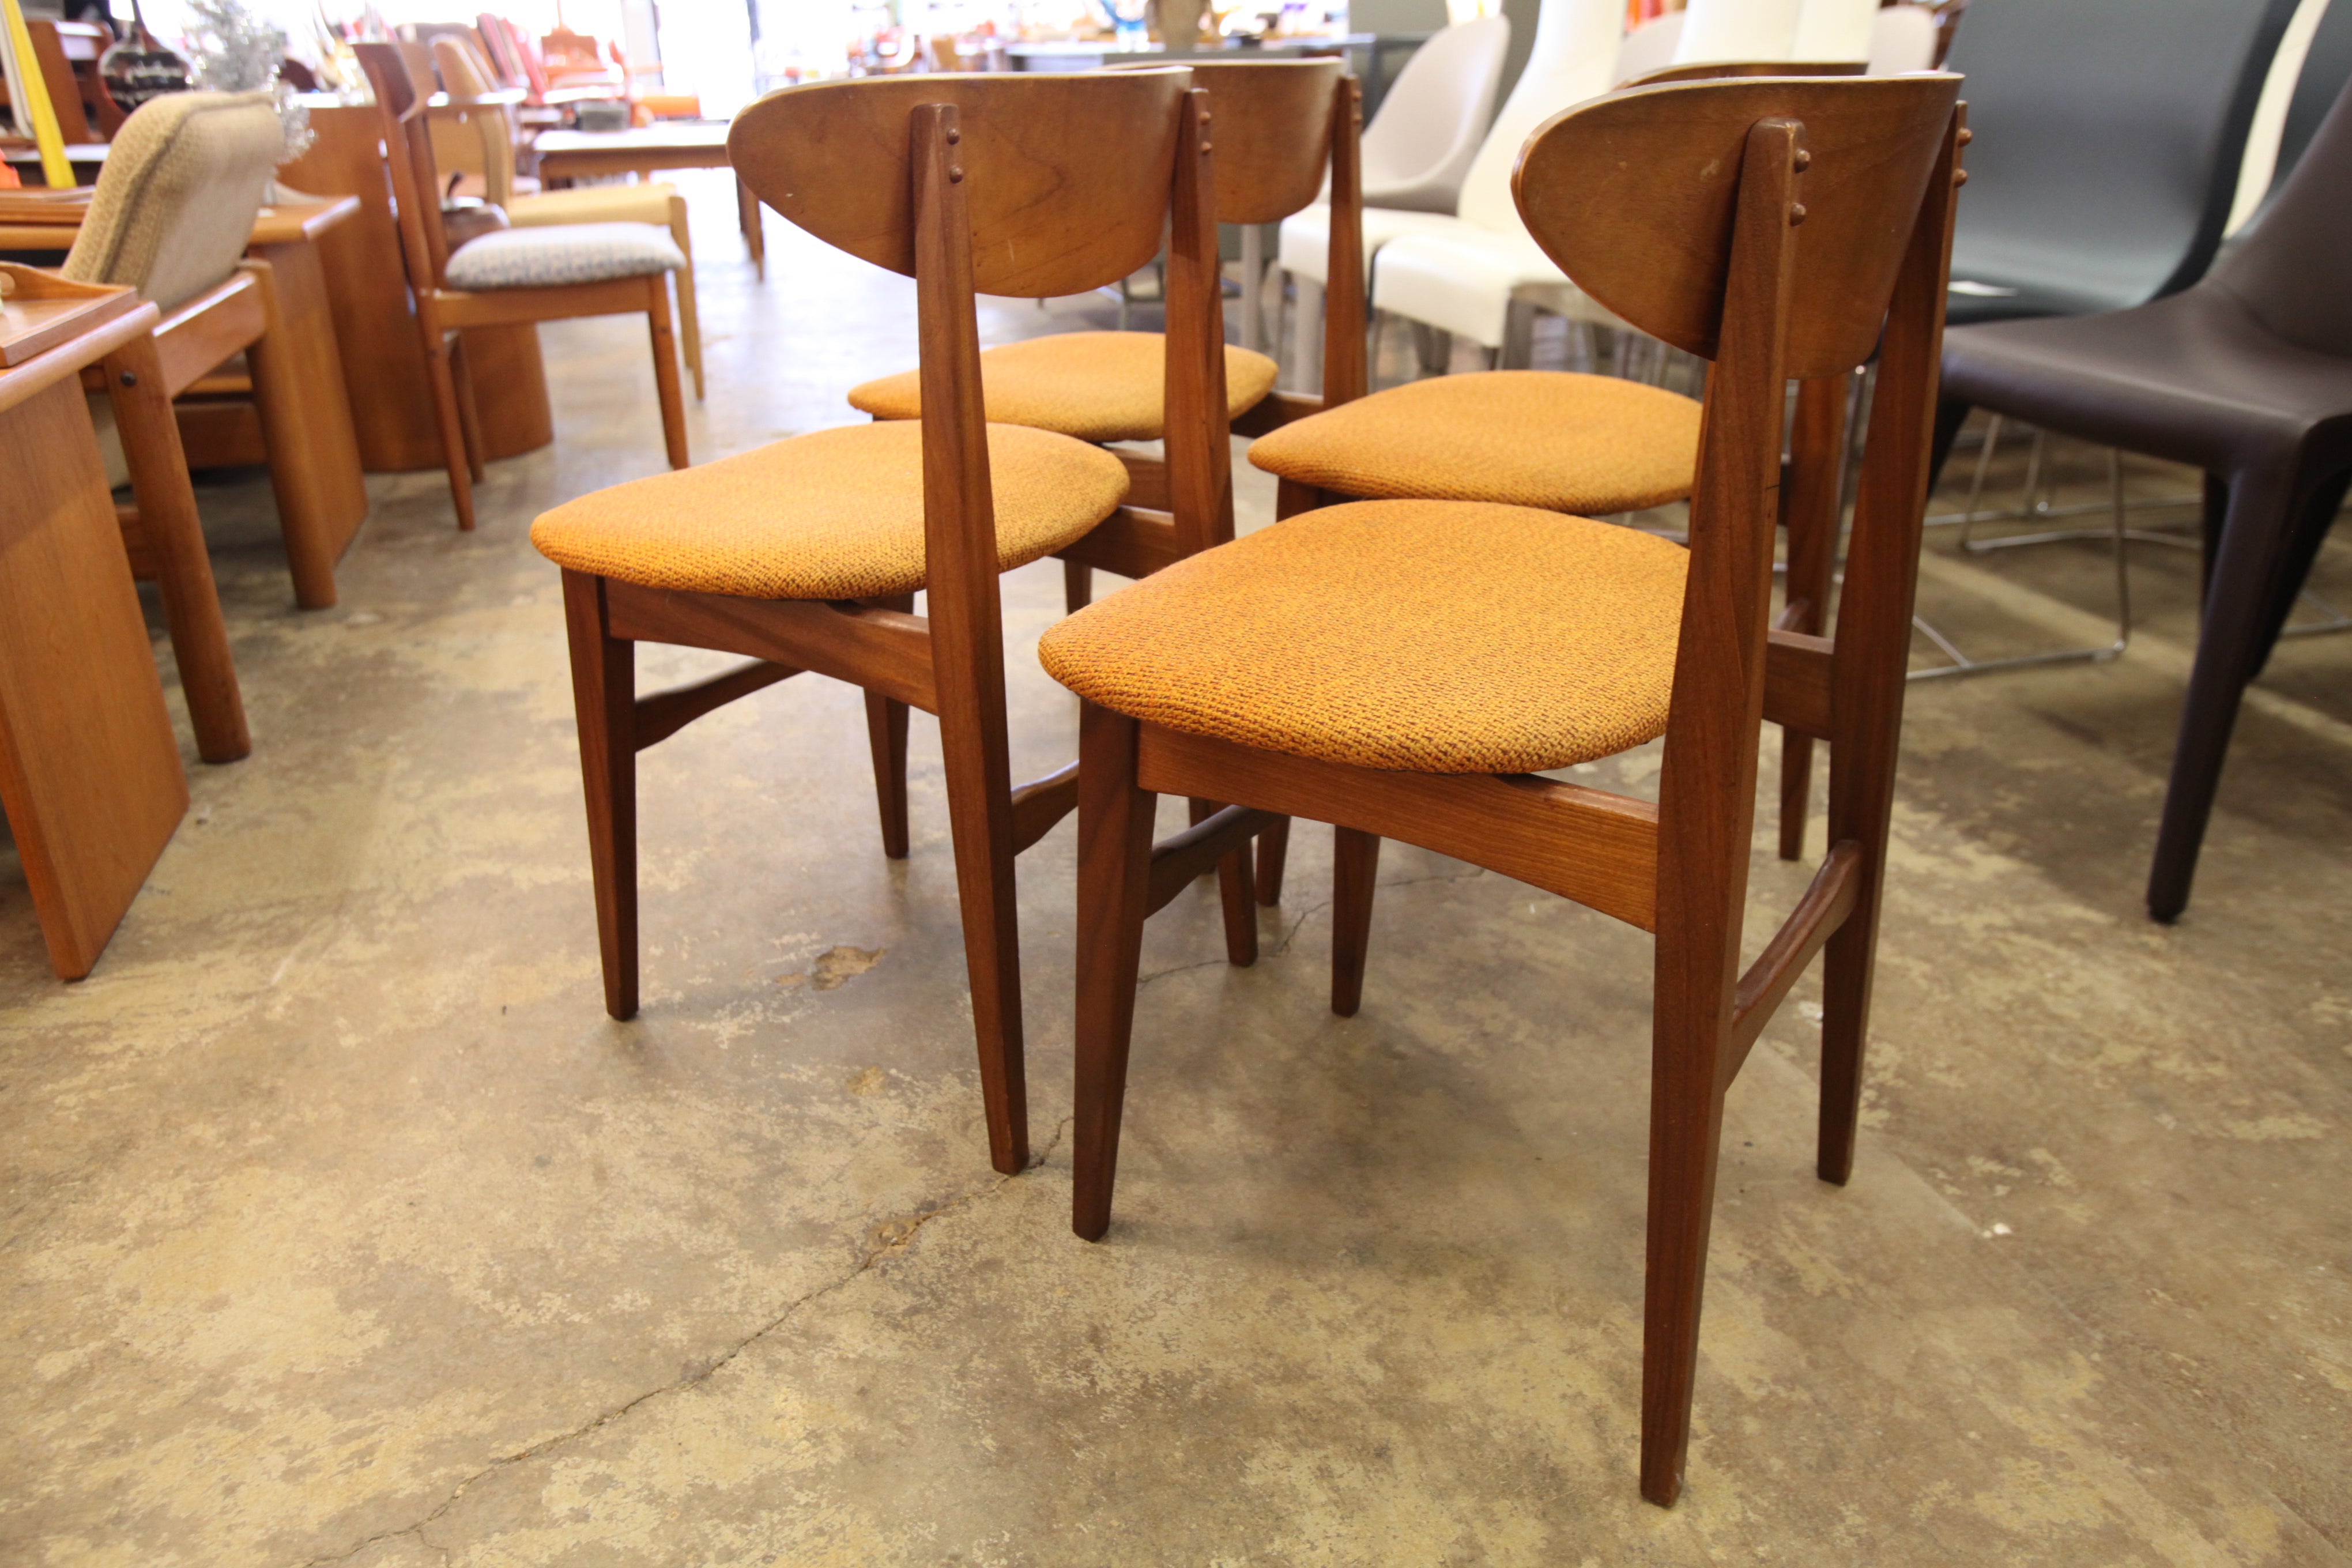 Set of 4 Vintage Wood Back Teak Dining Chairs (19"W x 18"D x 29.5"H)